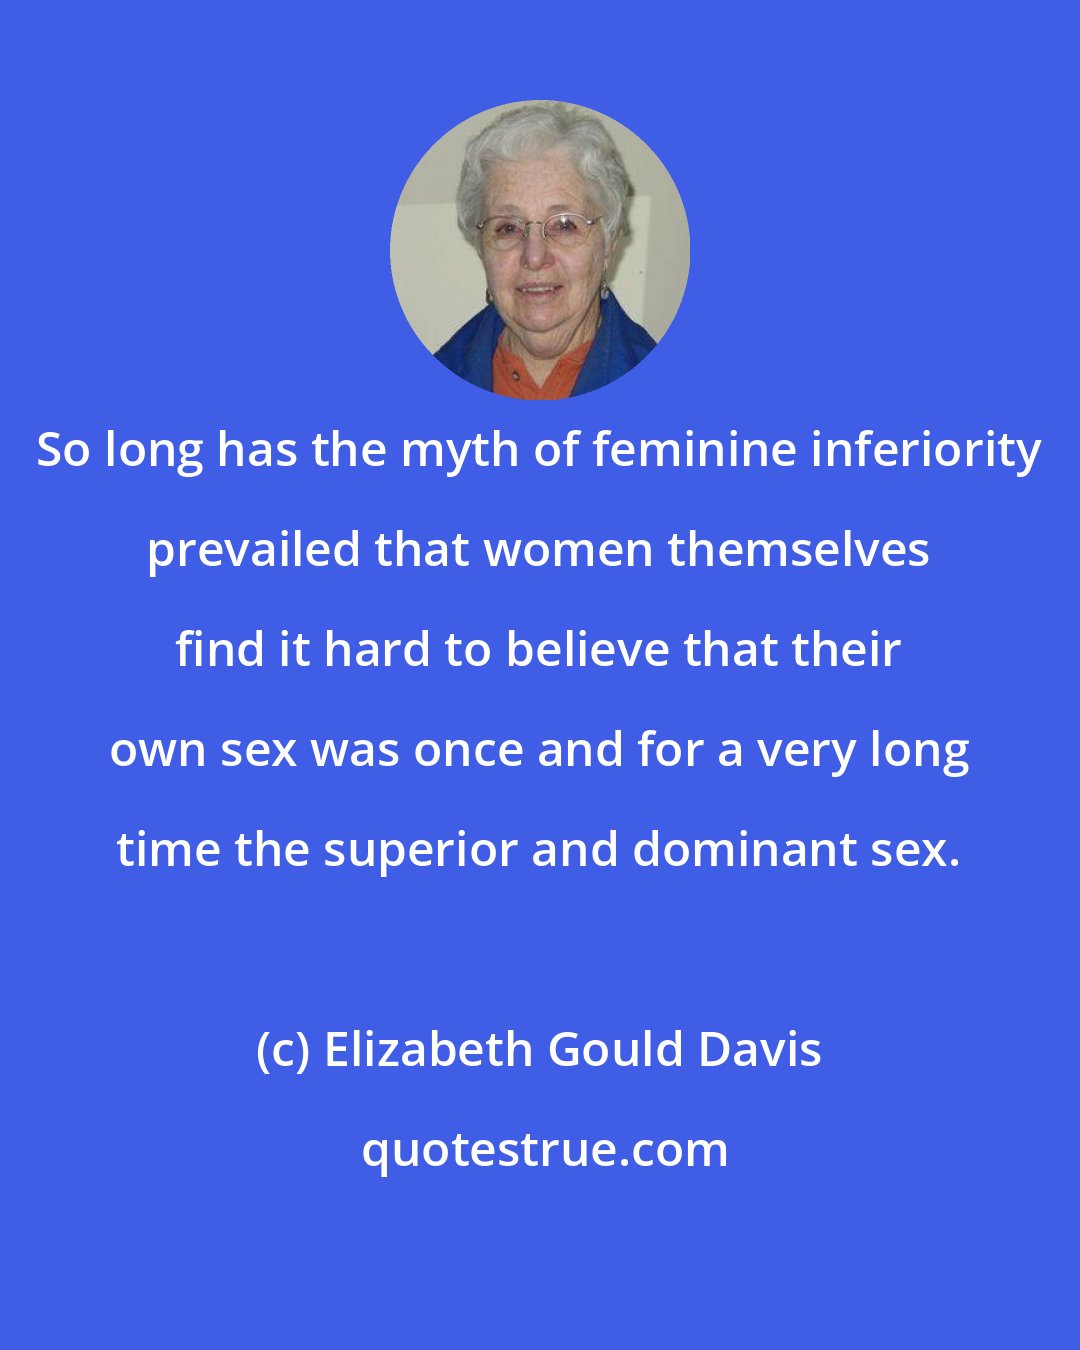 Elizabeth Gould Davis: So long has the myth of feminine inferiority prevailed that women themselves find it hard to believe that their own sex was once and for a very long time the superior and dominant sex.